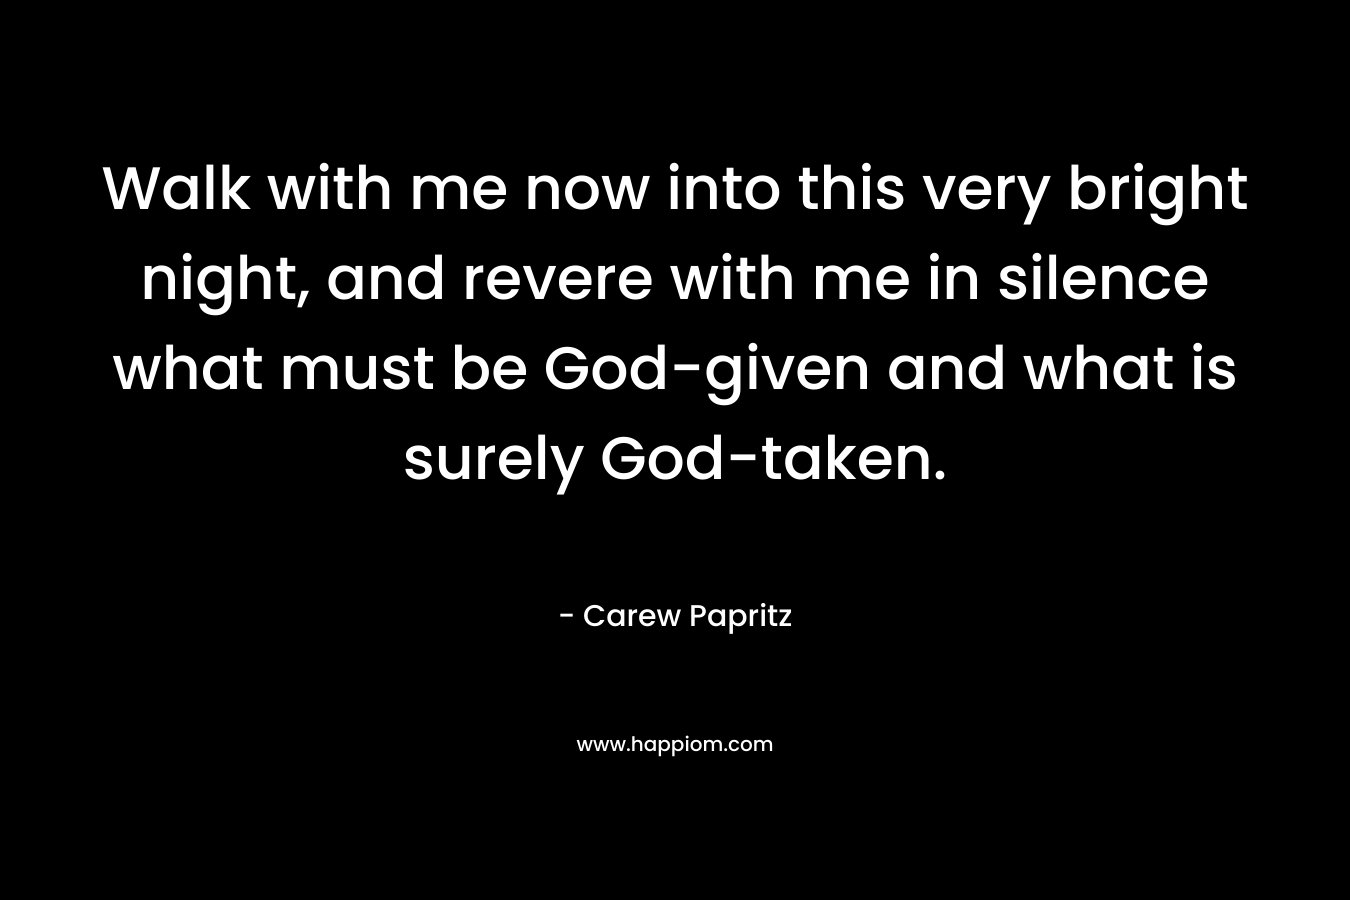 Walk with me now into this very bright night, and revere with me in silence what must be God-given and what is surely God-taken. – Carew Papritz